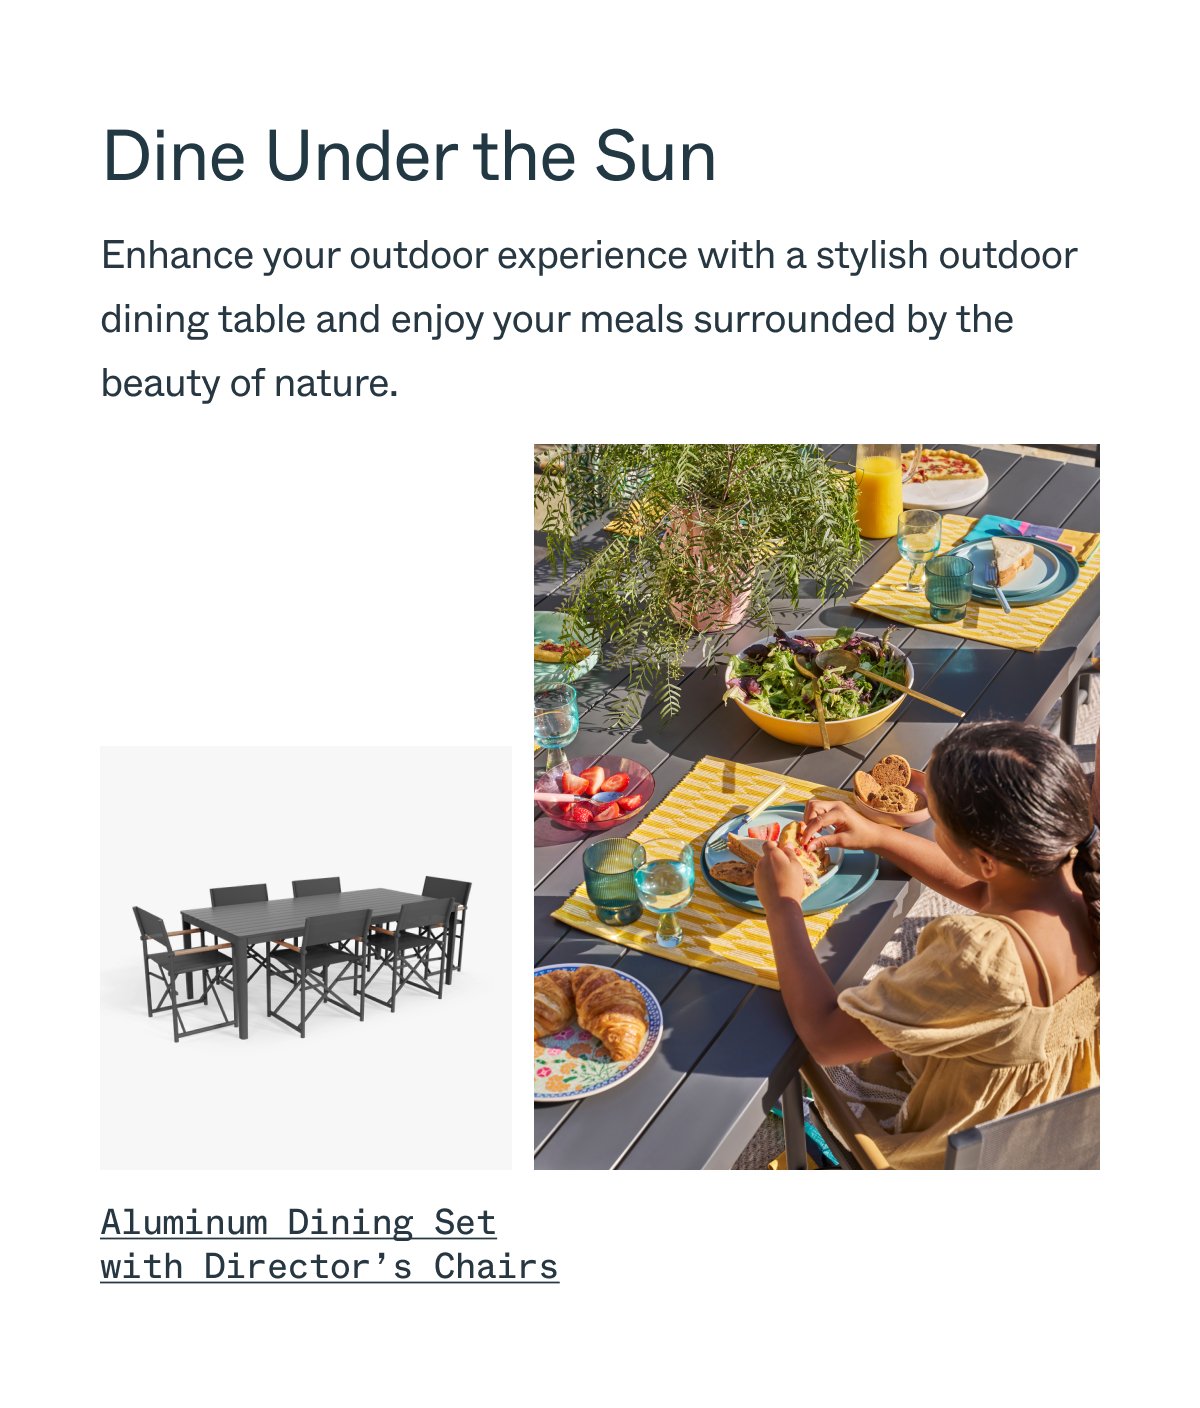 Dine Under the Sun Enhance your outdoor experience with a stylish outdoor dining table and enjoy your meals surrounded by the beauty of nature. Aluminum Dining Set with Director’s Chairs